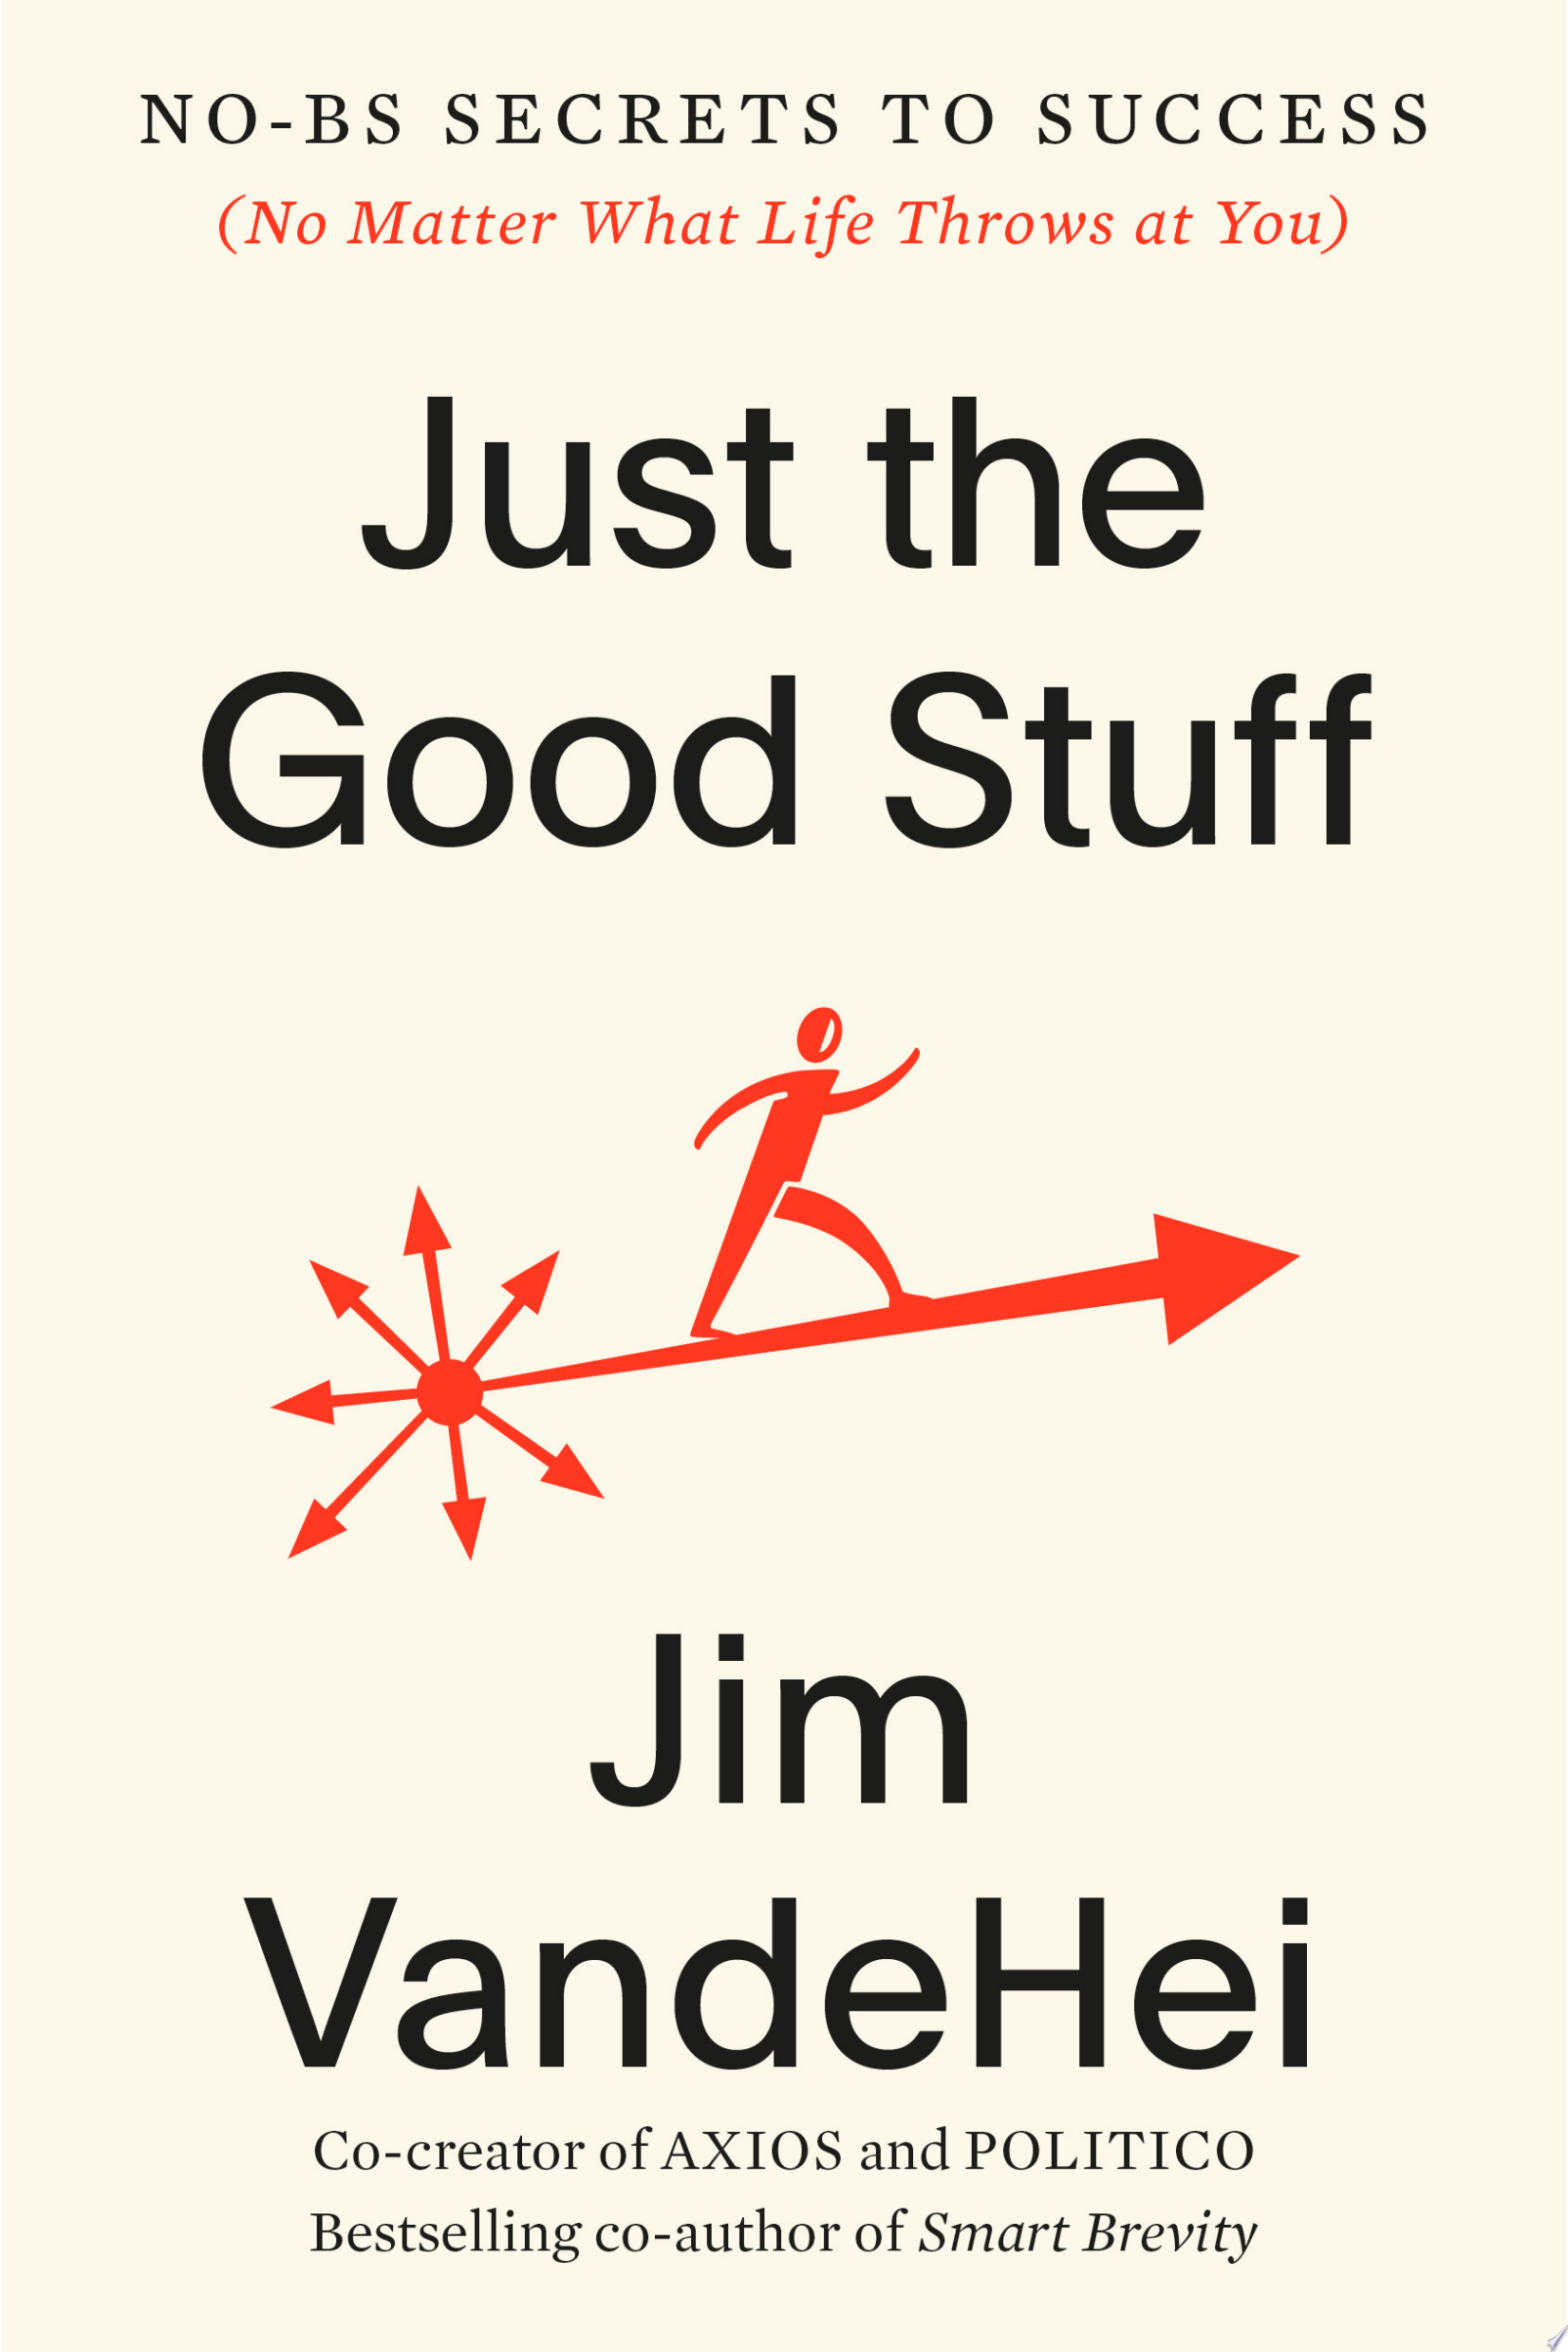 Image for "Just the Good Stuff"